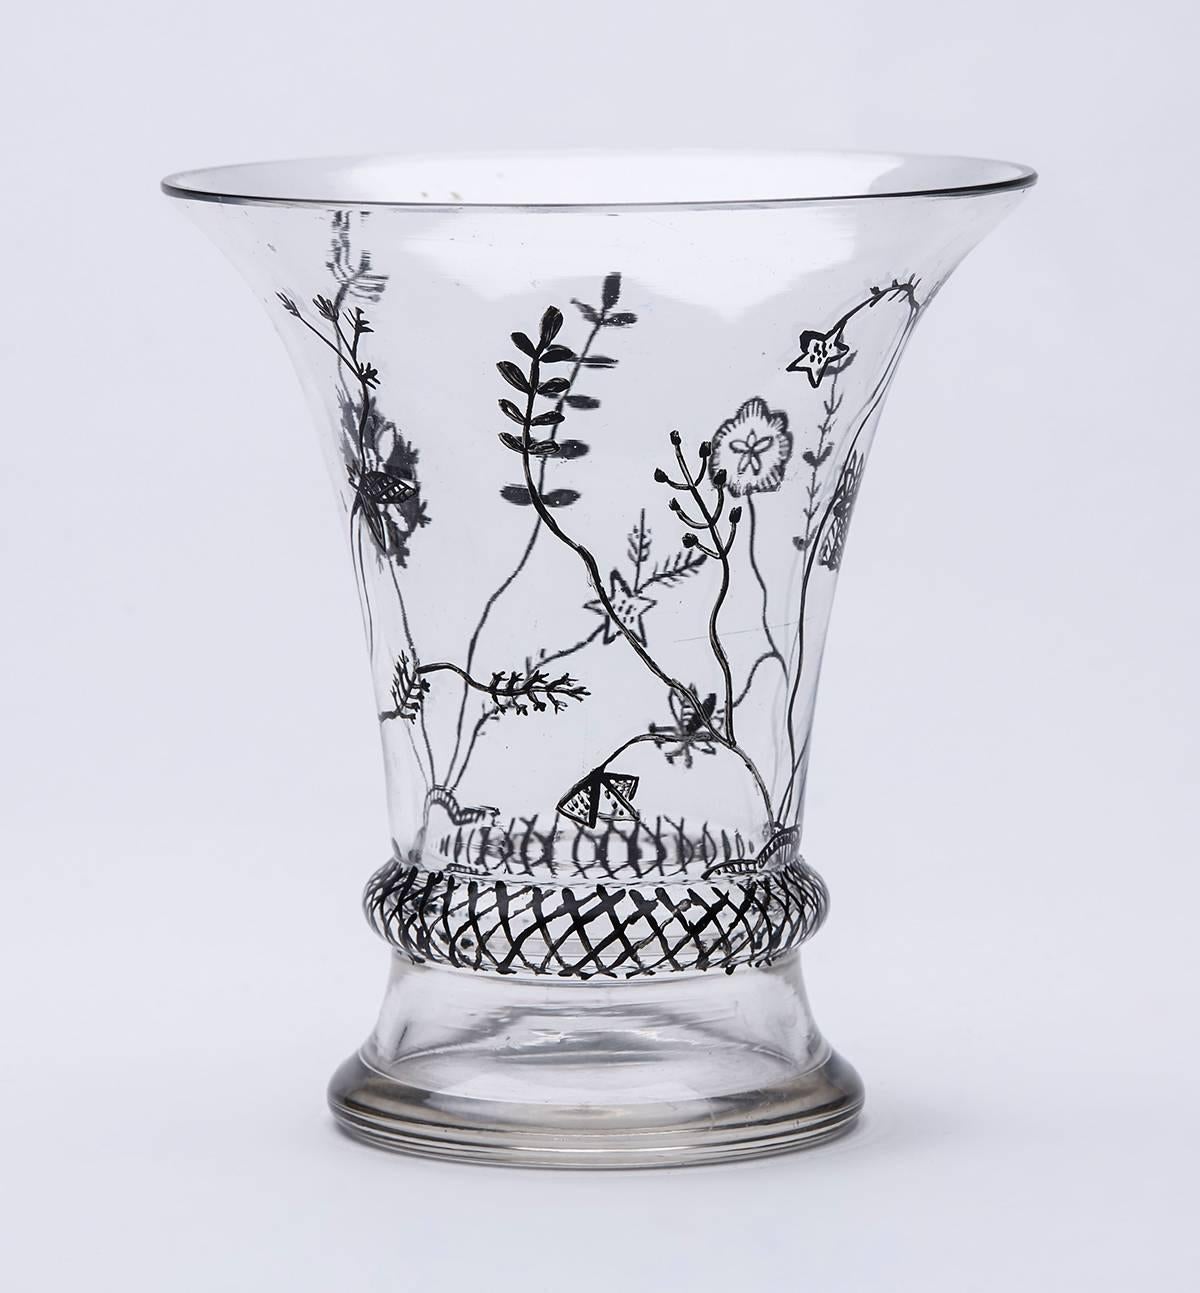 Fine and rare vintage Austrian art glass beaker shaped vase with a trumpet top applied with black enamel decoration probably made by Moser and possibly by Dacobert Peche for the Wiener Werkstatte. The vase is unmarked but typical of designs by the